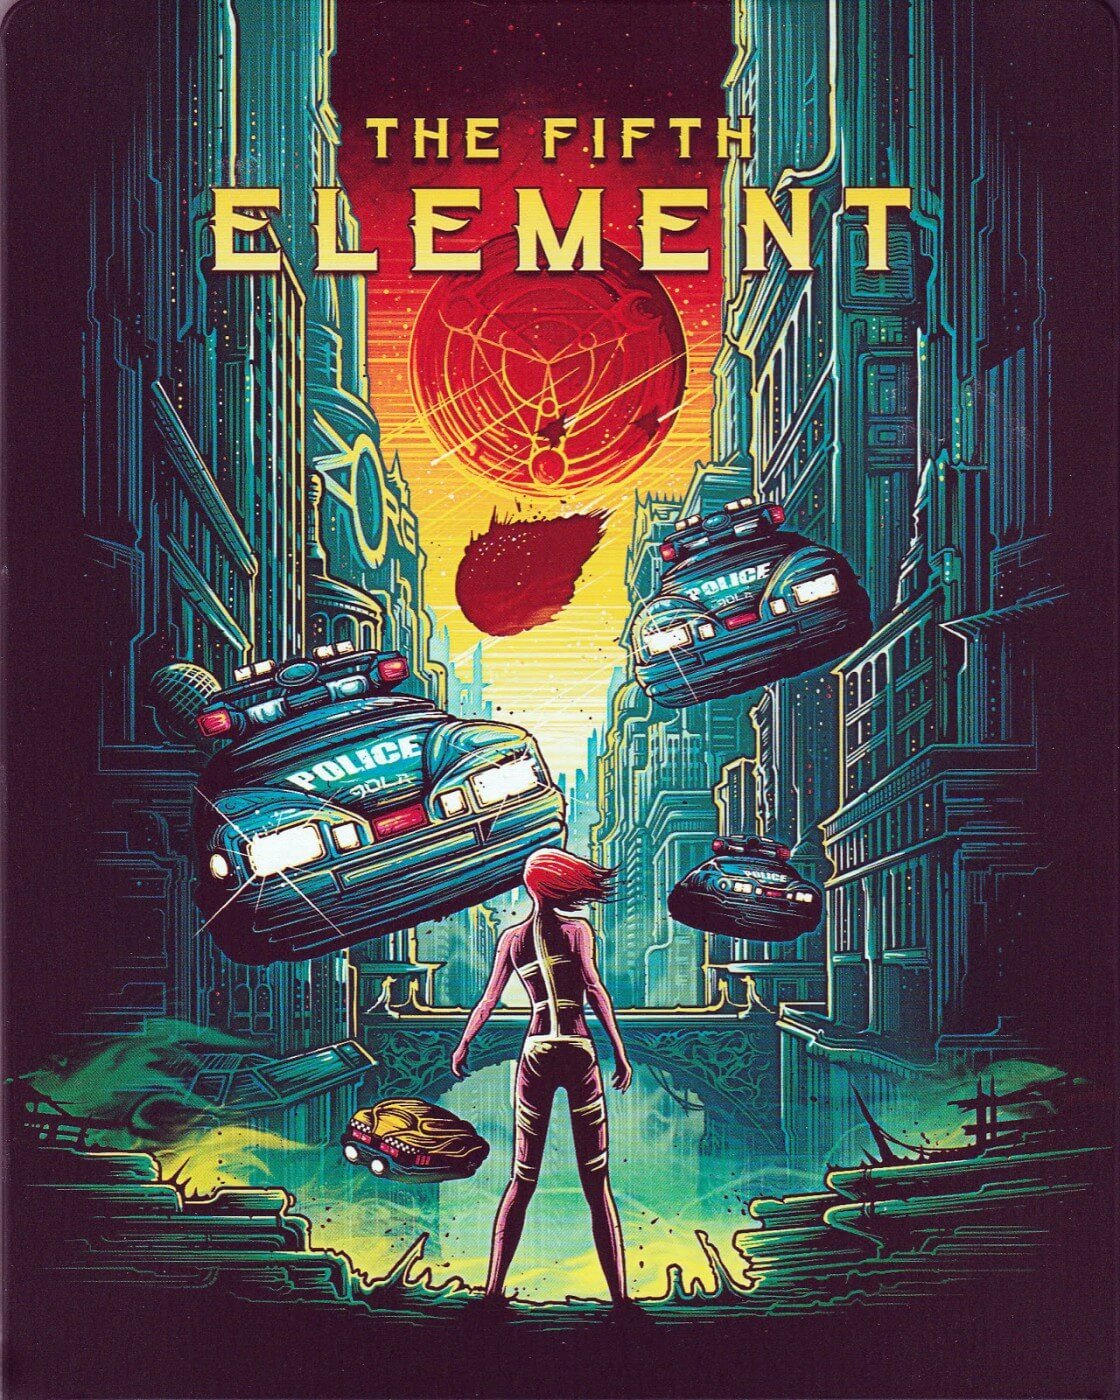 Fifth　Small,　Element　Hollywood　Large　Posters　Frames,　The　Poster　and　Digital　Buy　Compact,　Posters,　Medium　by　Poster　Prints　Movie　Art　Art　Brue　Tallenge　Canvas　Henry　Collection　Willis　Fan　Variants